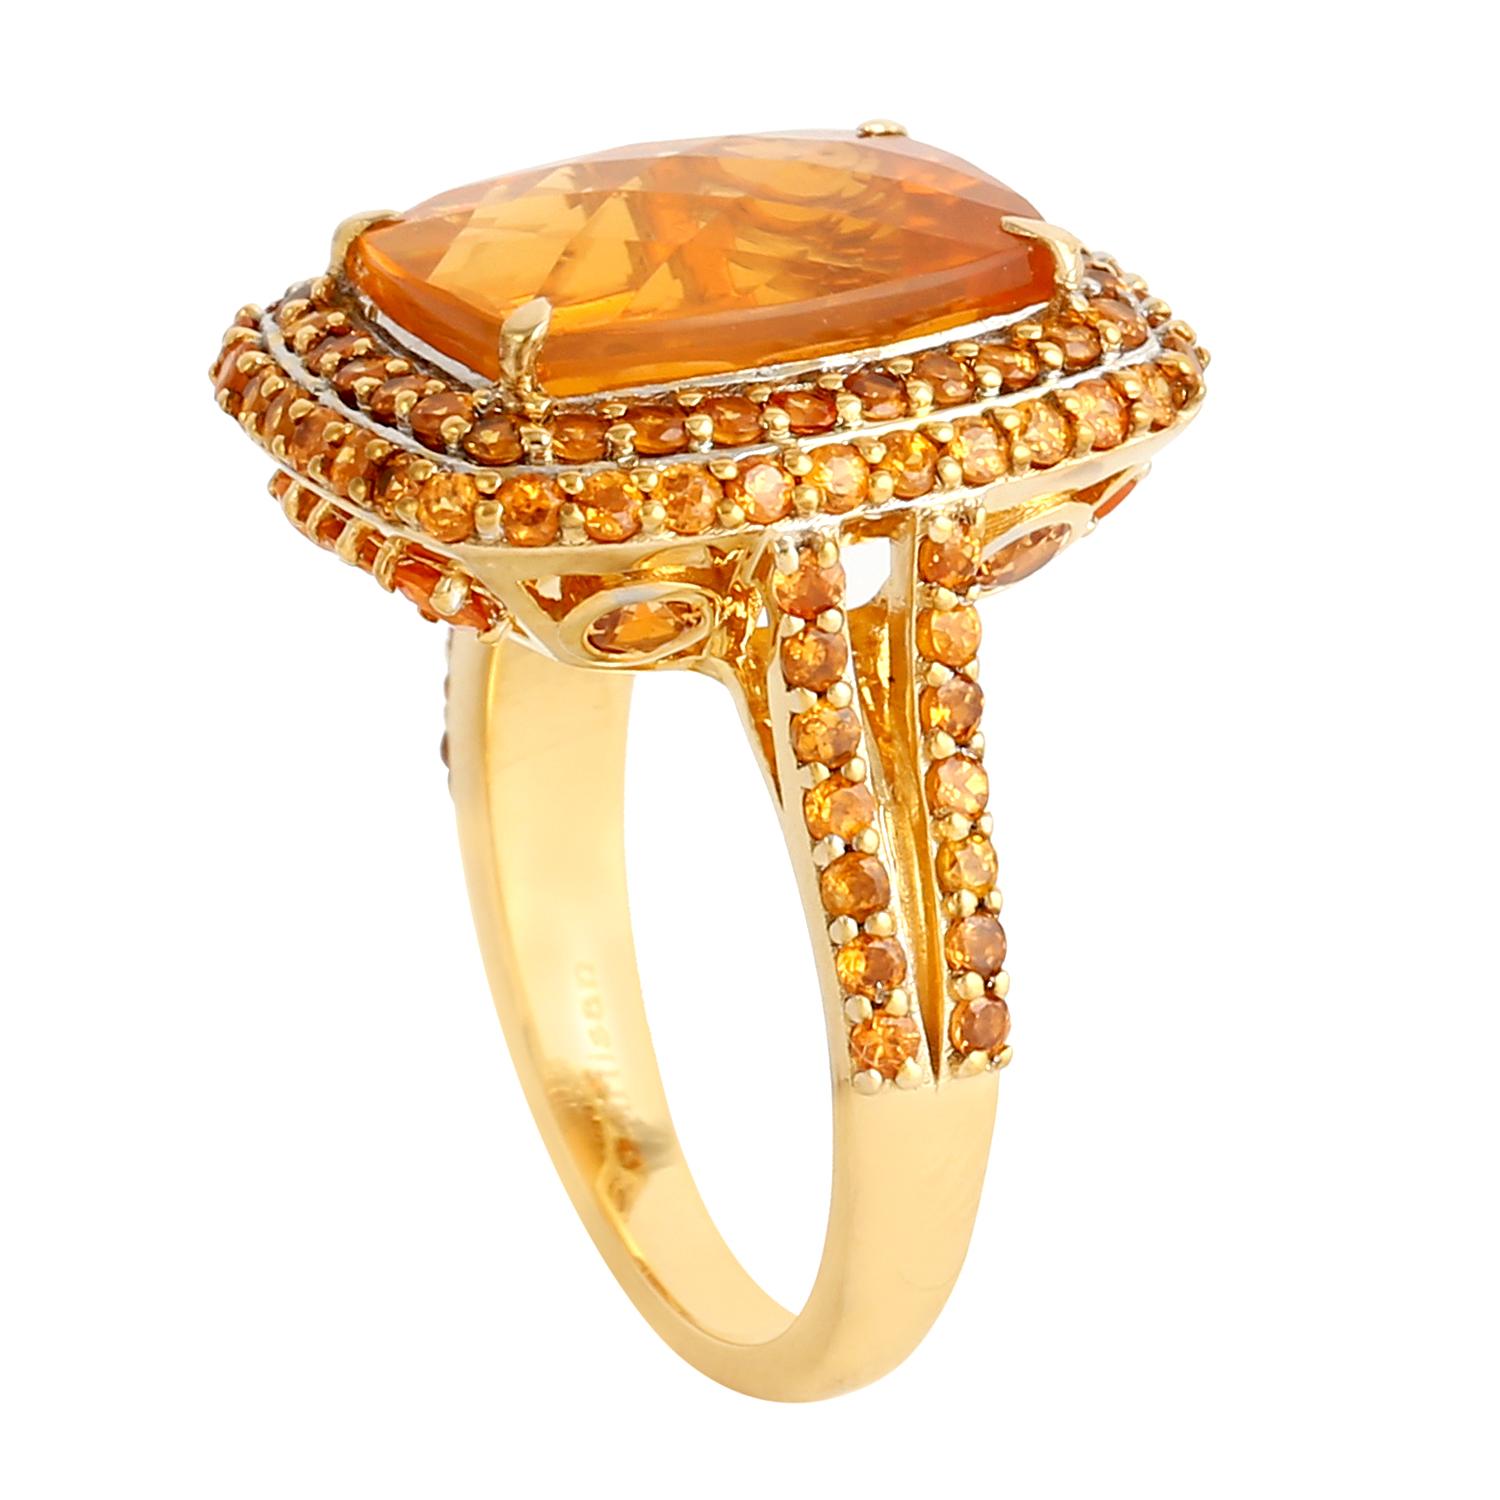 Mixed Cut Cushion Shaped Fire Opal Cocktail Ring w/ Garnet & Diamonds Made In 18k Gold For Sale